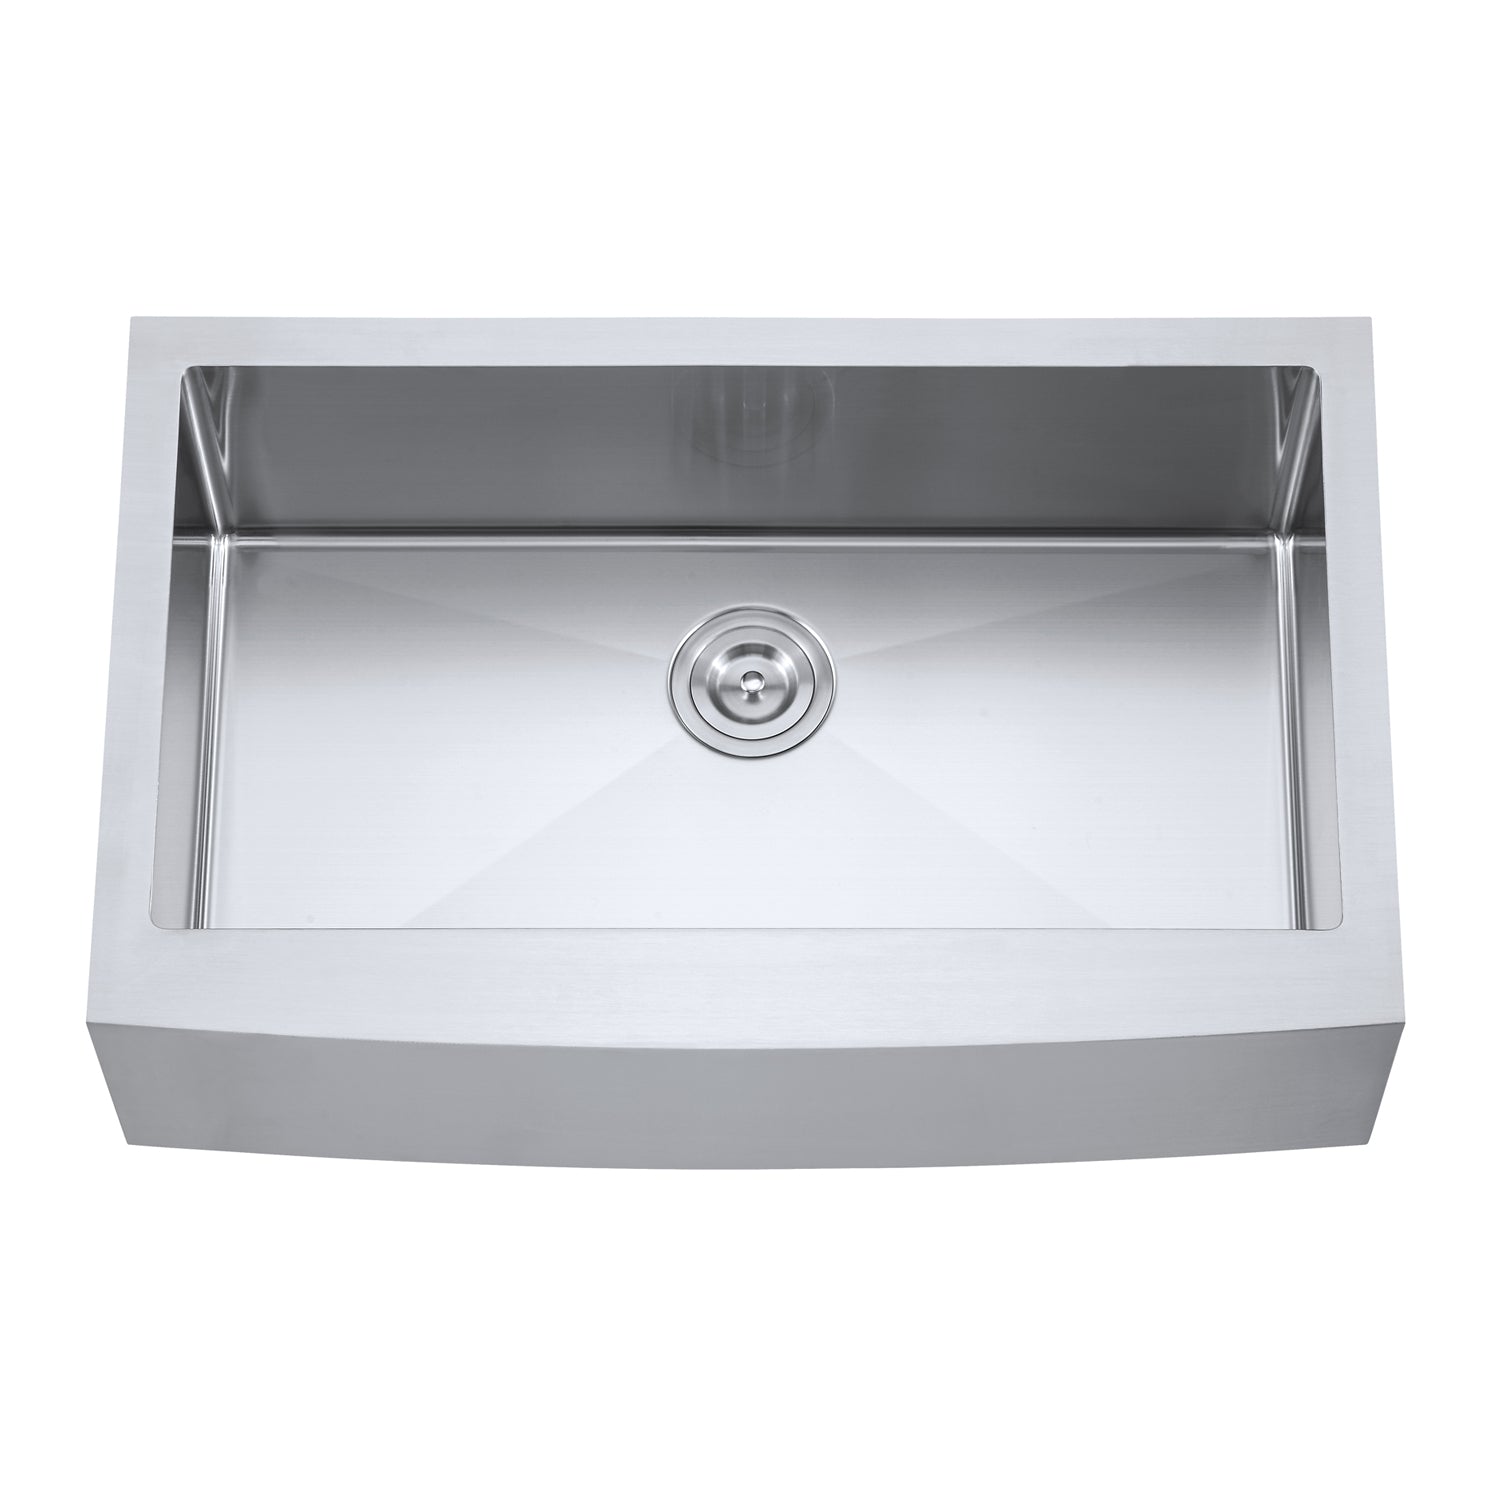 DAX Farmhouse Single Bowl Kitchen Sink, 18 Gauge Stainless Steel, Brushed Finish, 30 x 21 x 10 Inches (DAX-3021R10)